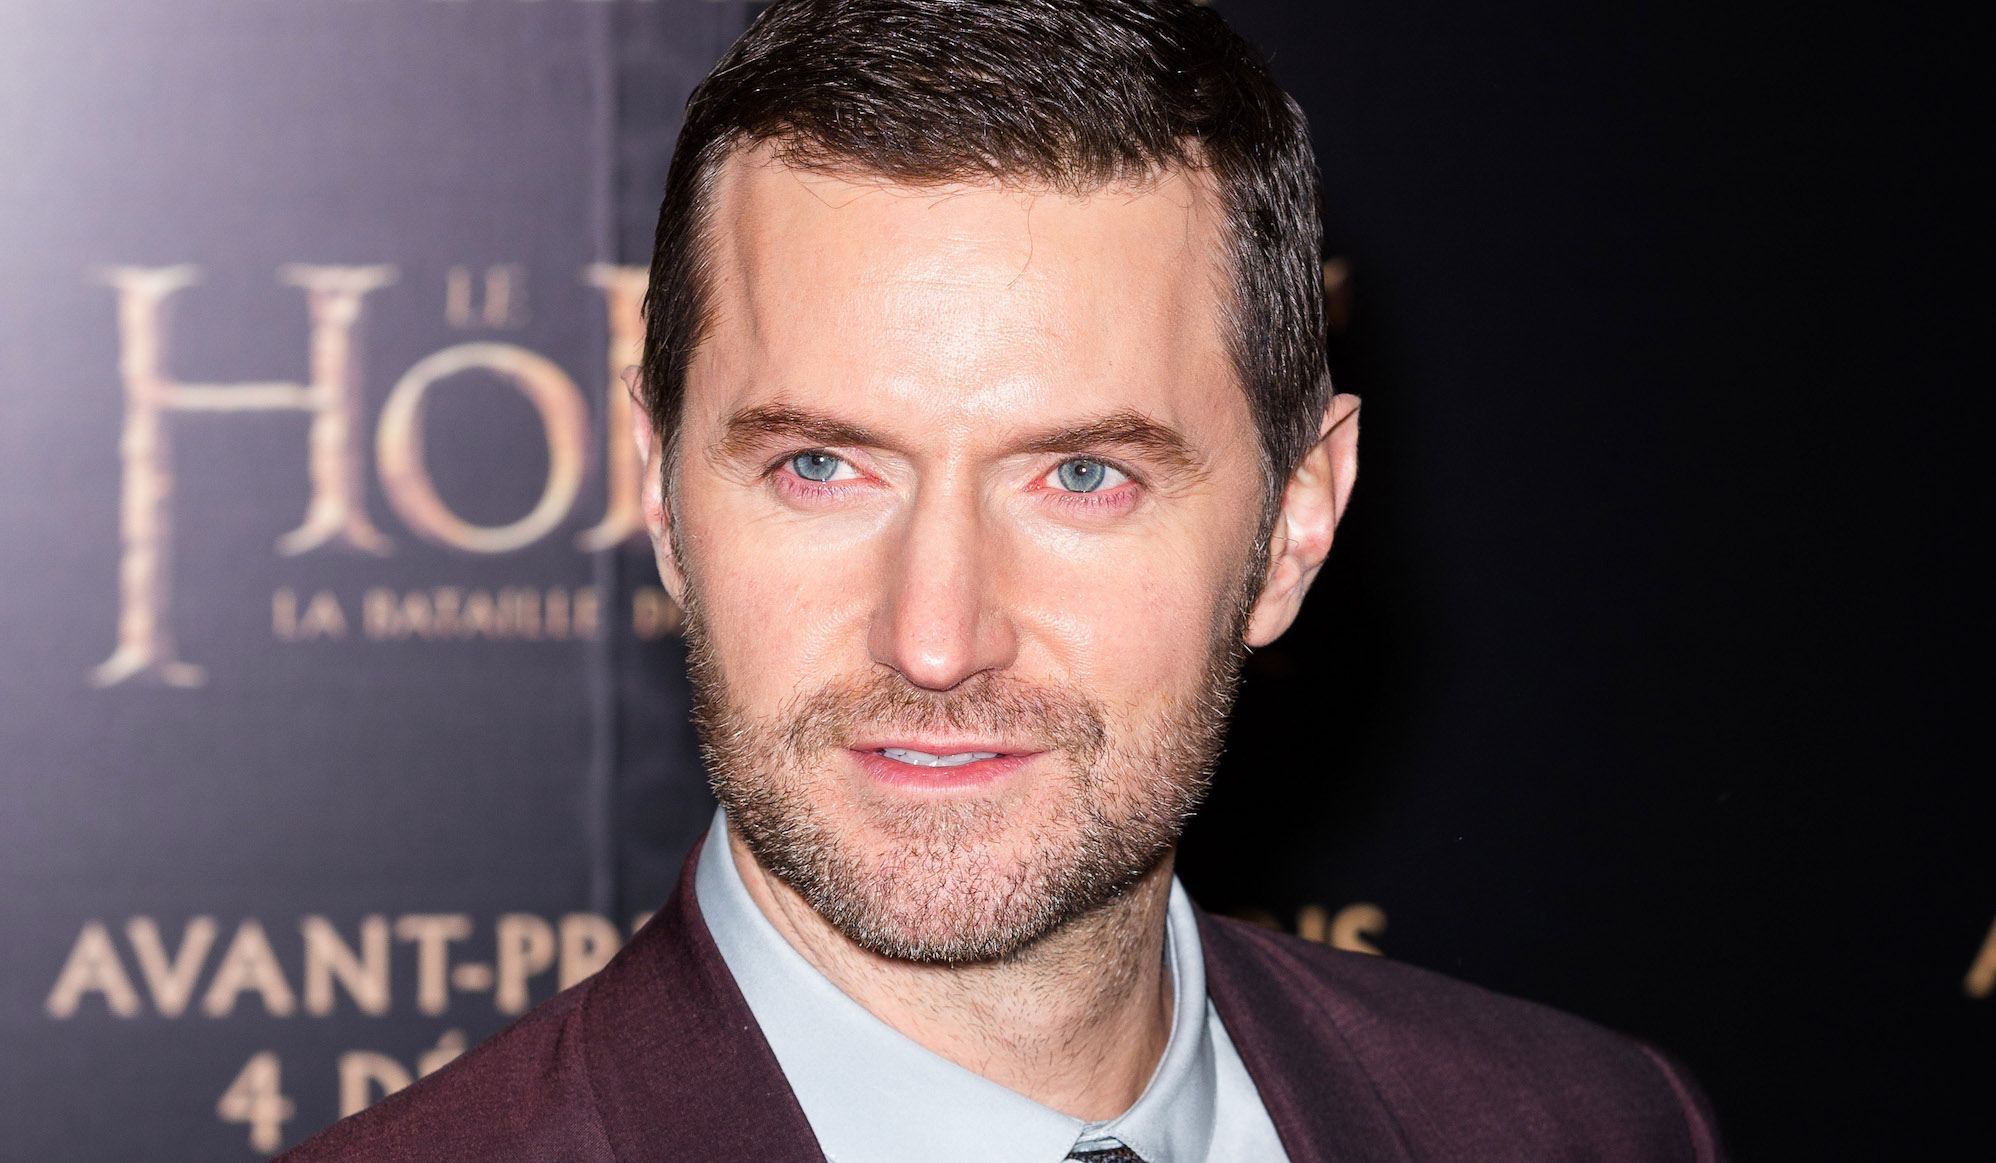 Mini Rechard Sex Videos - Richard Armitage on sexuality, male partner and coming out